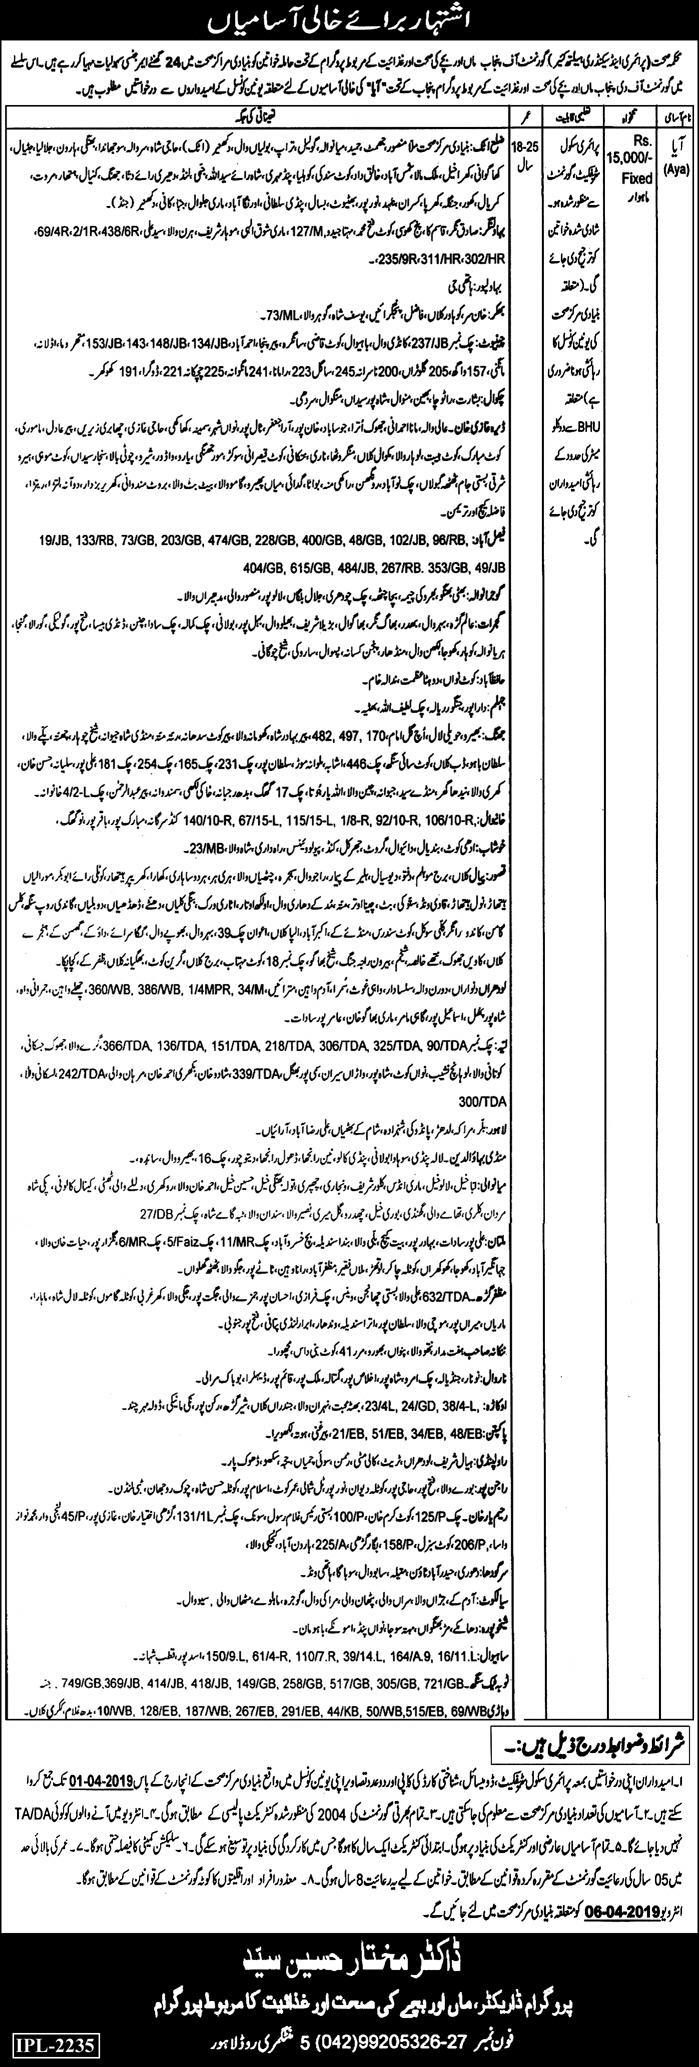 Elementary and Secondary Education Department jobs 2019